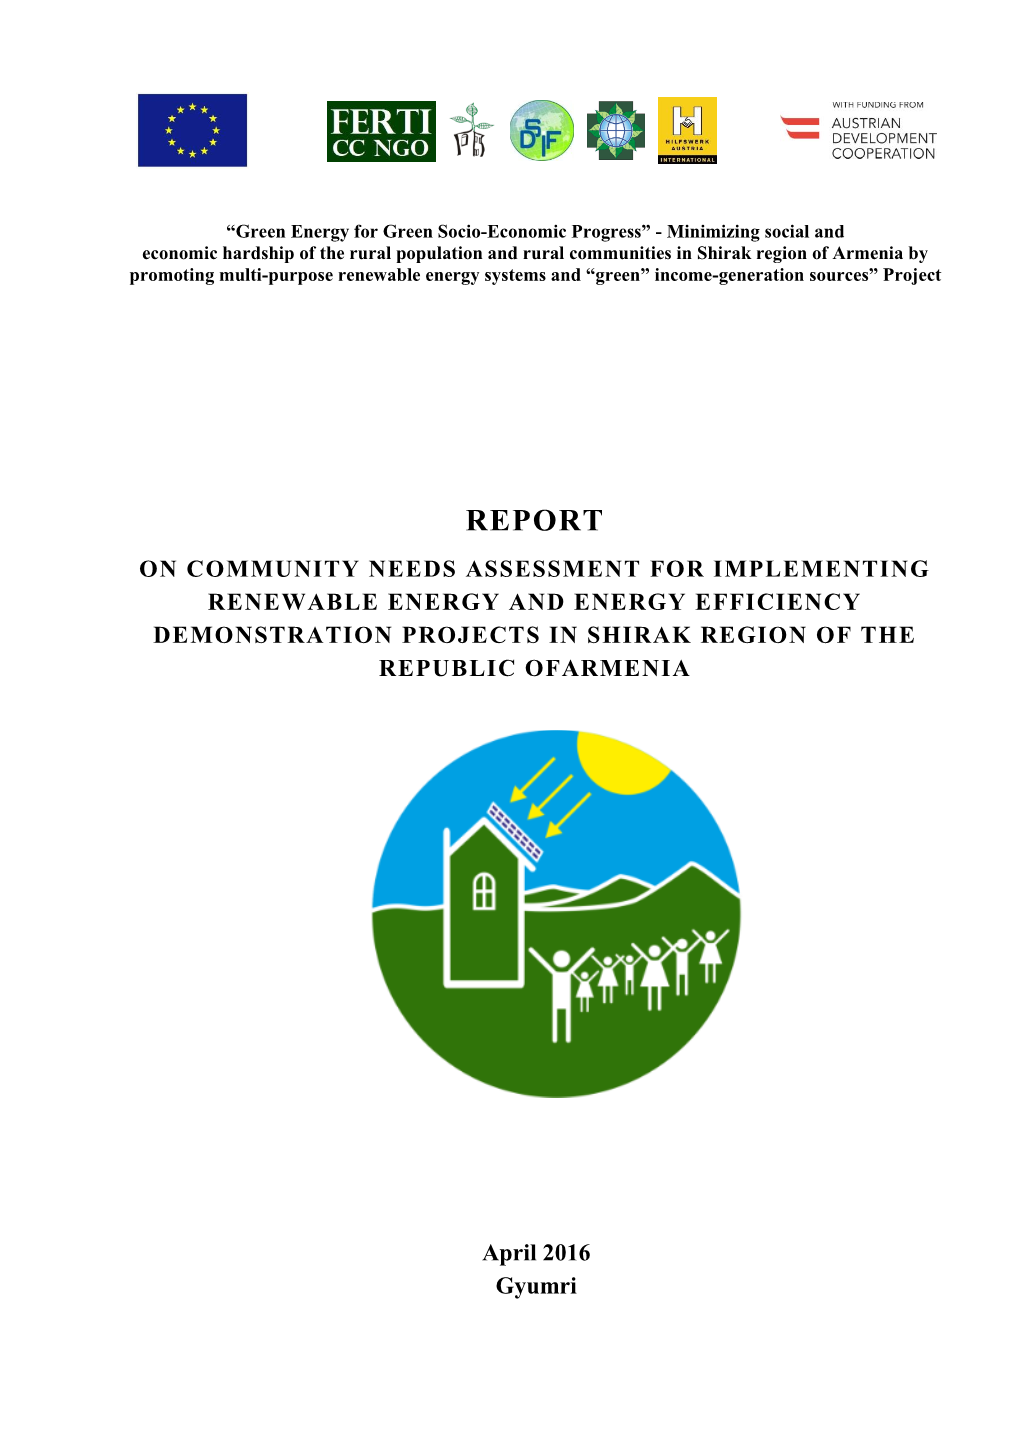 Report on Community Needs Assessment for Implementing Renewable Energy and Energy Efficiency Demonstration Projects in Shirak Region of the Republic Ofarmenia